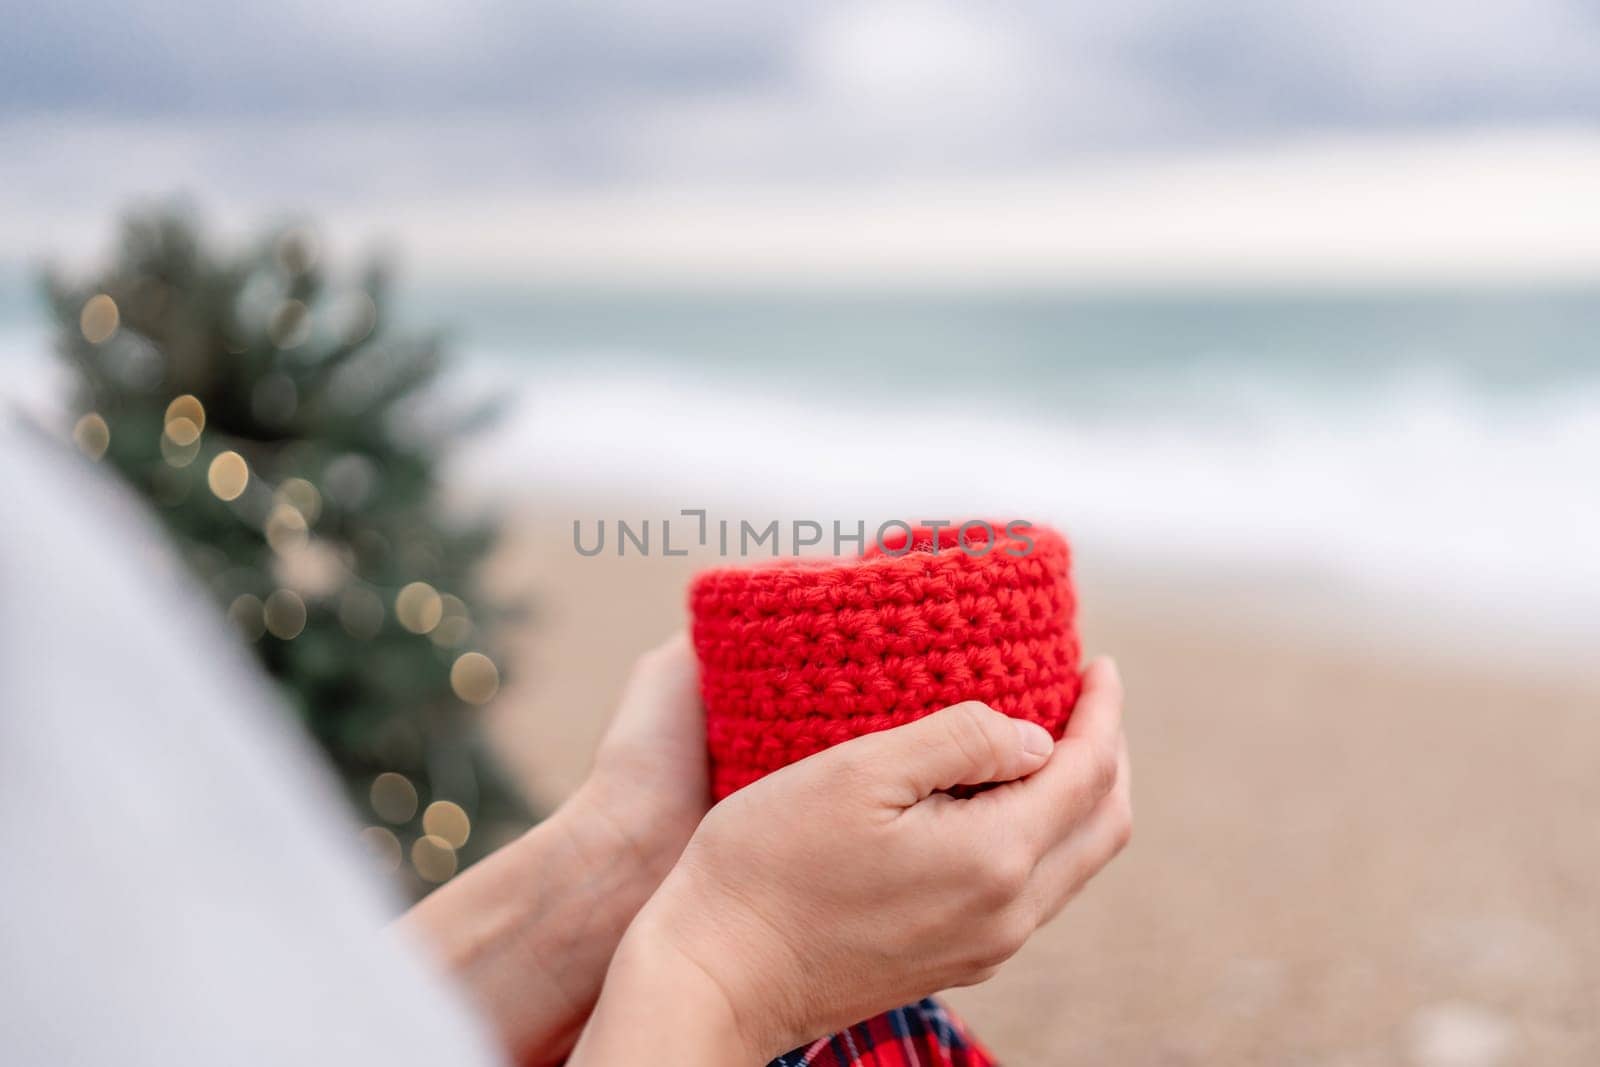 Sea Lady in plaid shirt with a red mug in her hands enjoys beach with Christmas tree. Coastal area. Christmas, New Year holidays concep by Matiunina